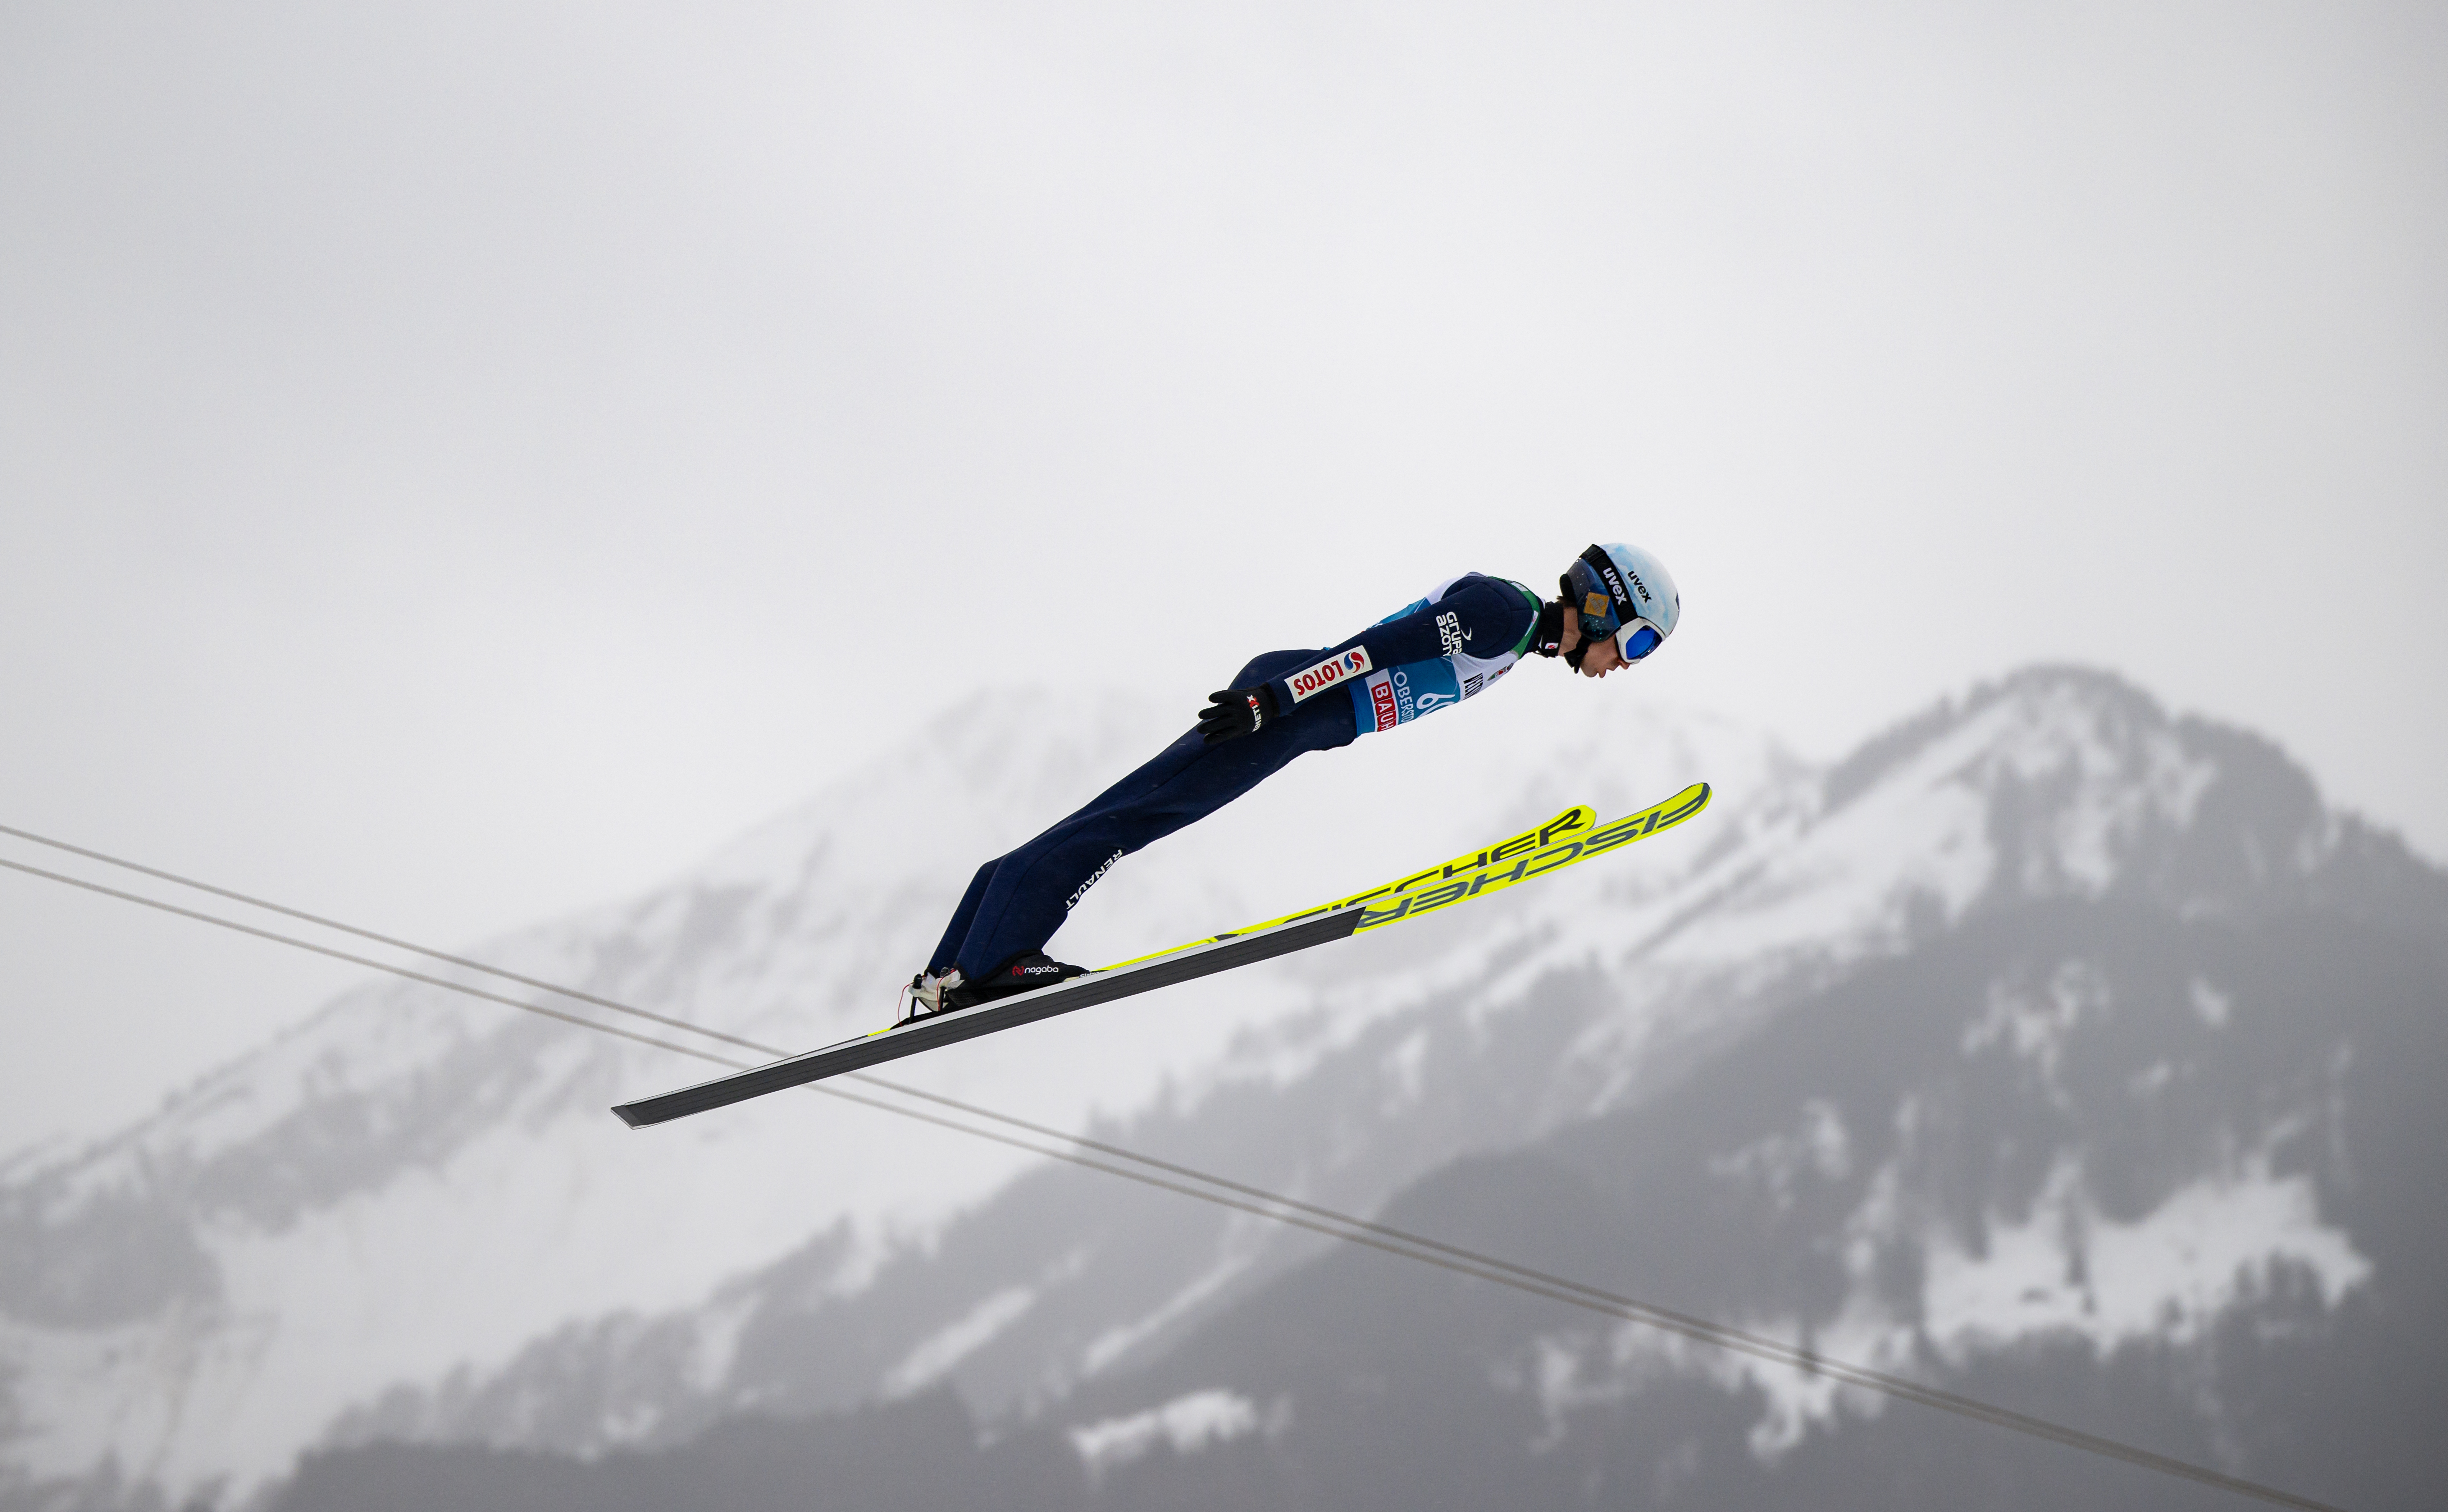 How to Watch Ski Jumping at the 2022 Winter Olympics